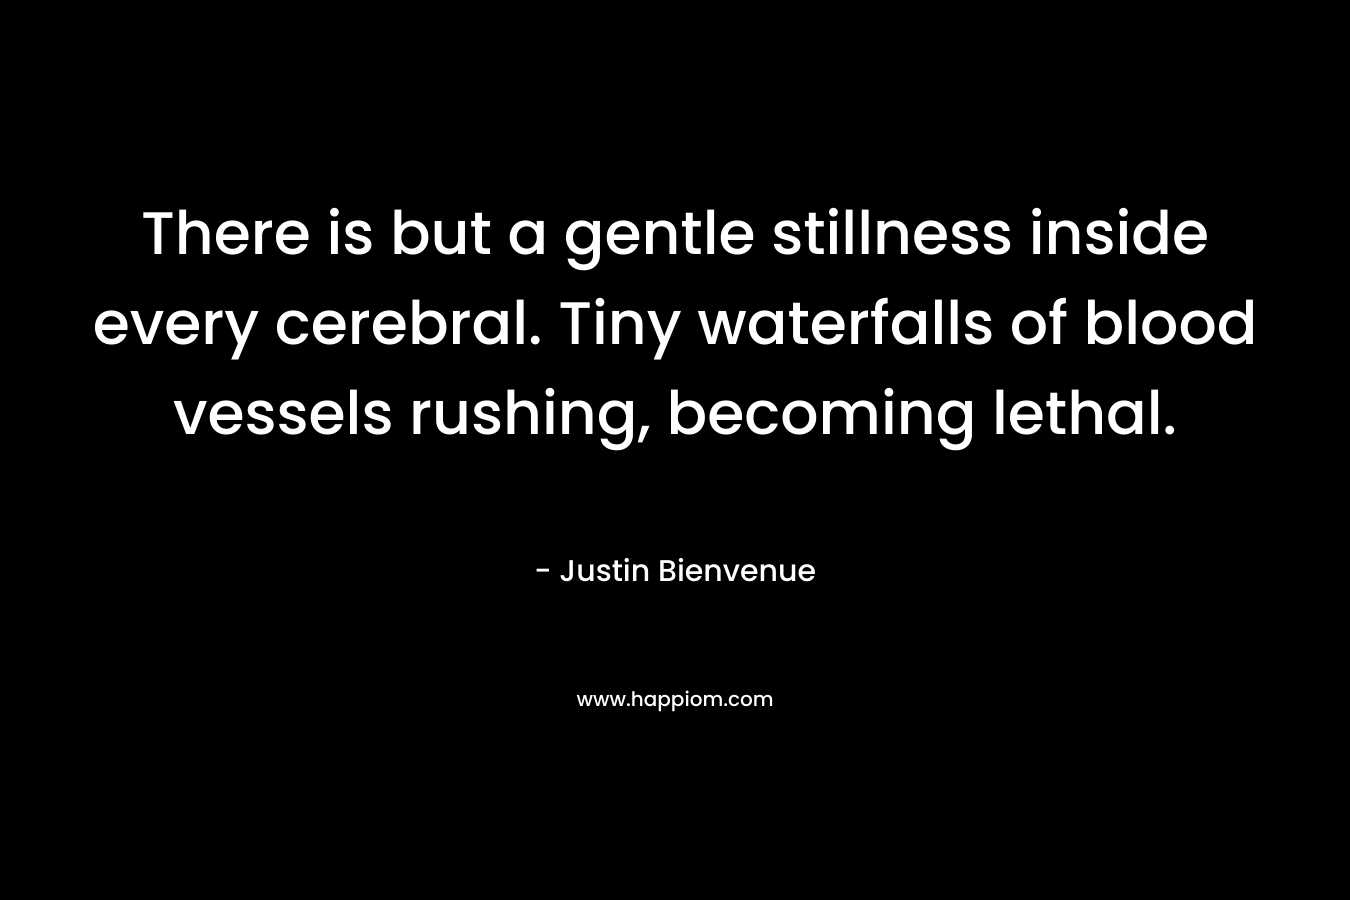 There is but a gentle stillness inside every cerebral. Tiny waterfalls of blood vessels rushing, becoming lethal.